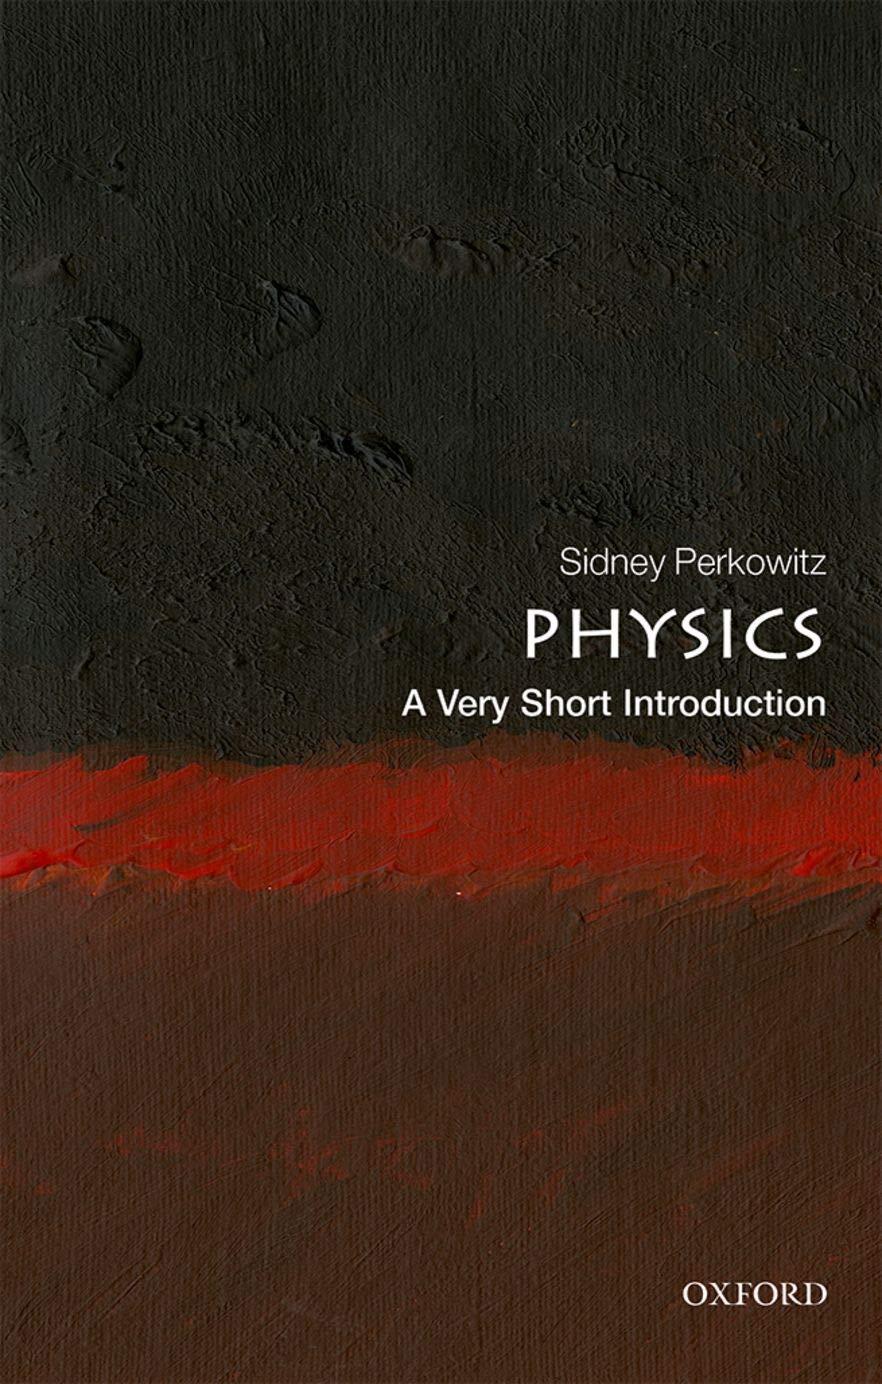 physics a very short introduction 1st edition sidney perkowitz 0198813945, 978-0198813941